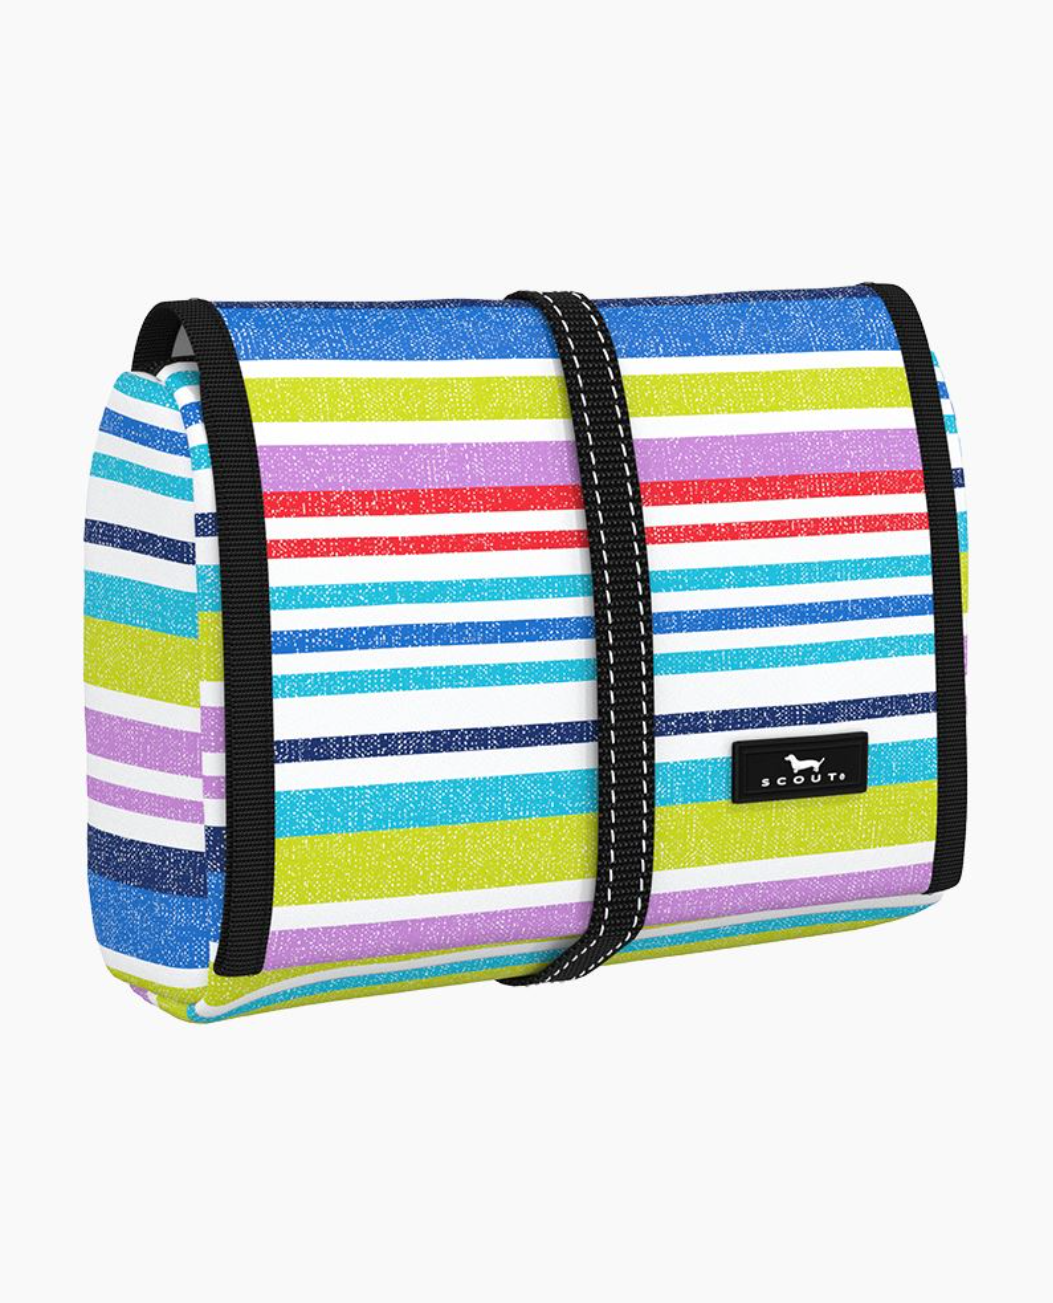 Scout Beauty Burrito Toiletry Bag Travel Accessories in Sidewalk Chalk at Wrapsody